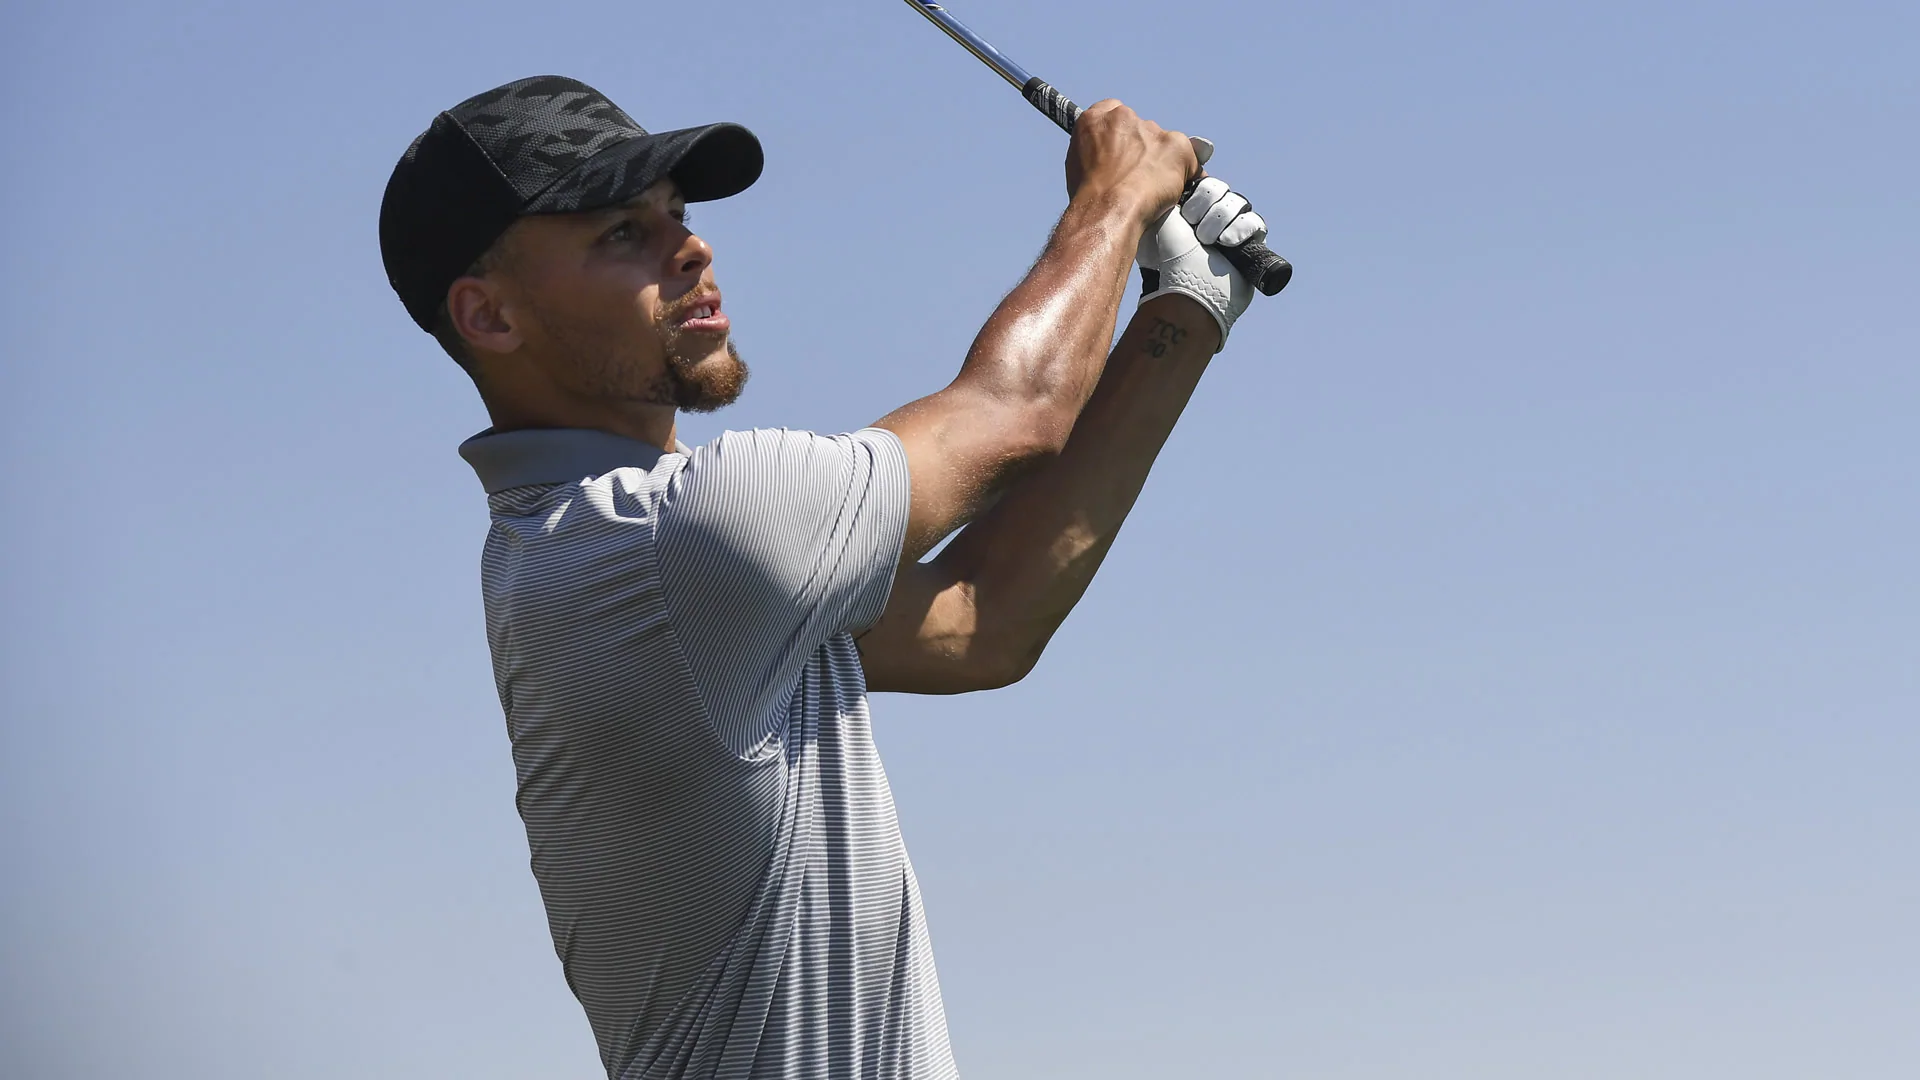 Nicklaus tweets encouragement to Steph Curry